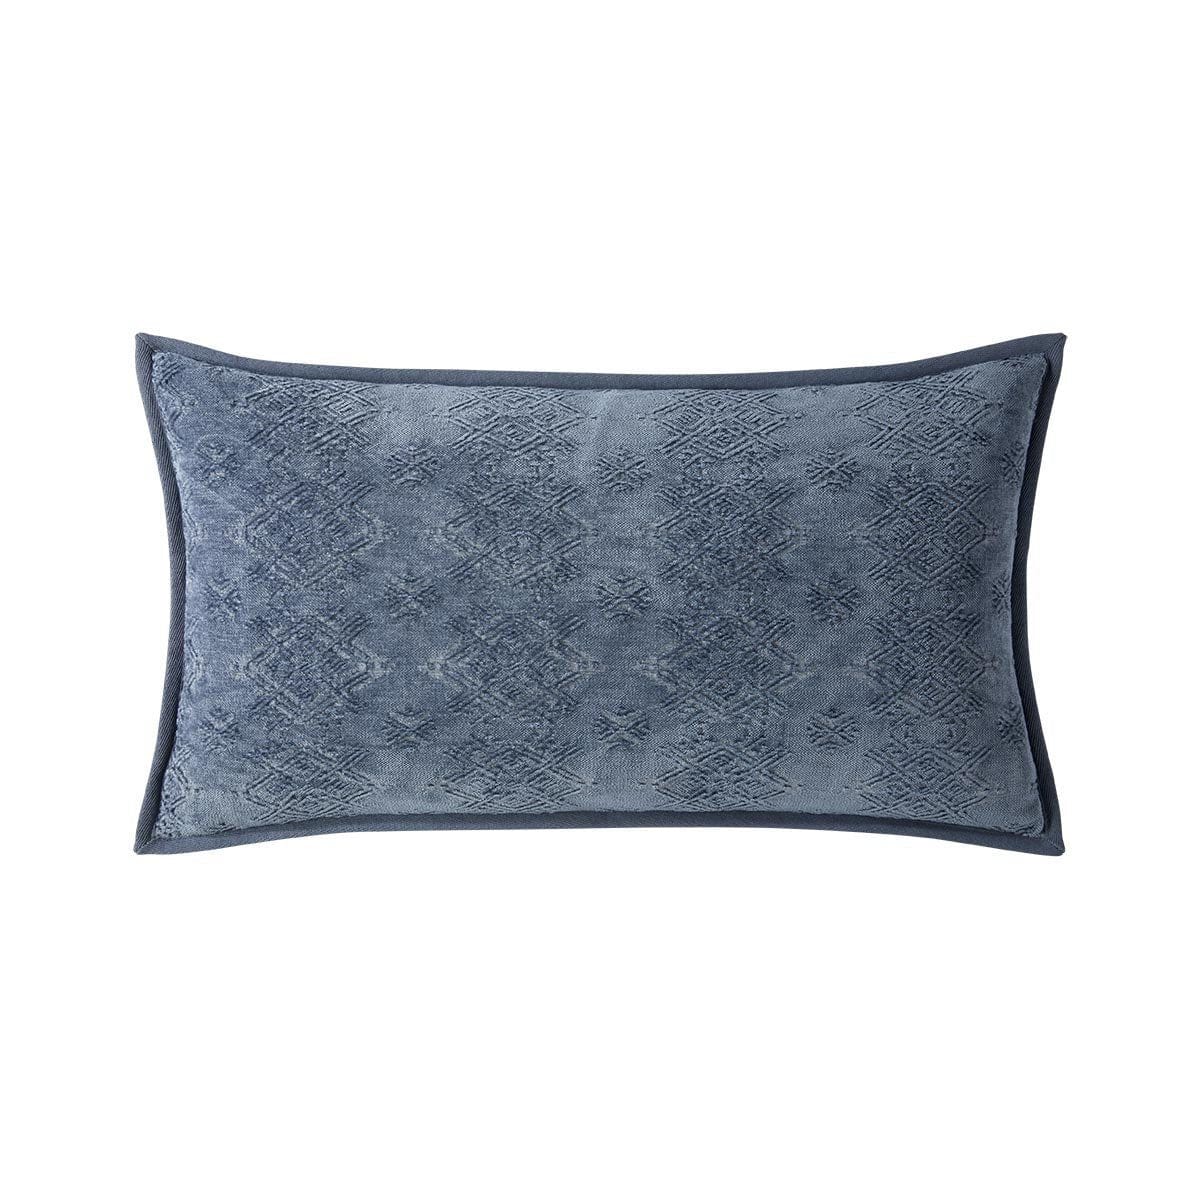 Decorative Pillows Iosis Syracuse Decorative Pillow by Yves Delorme Zinc (Grey) Yves Delorme